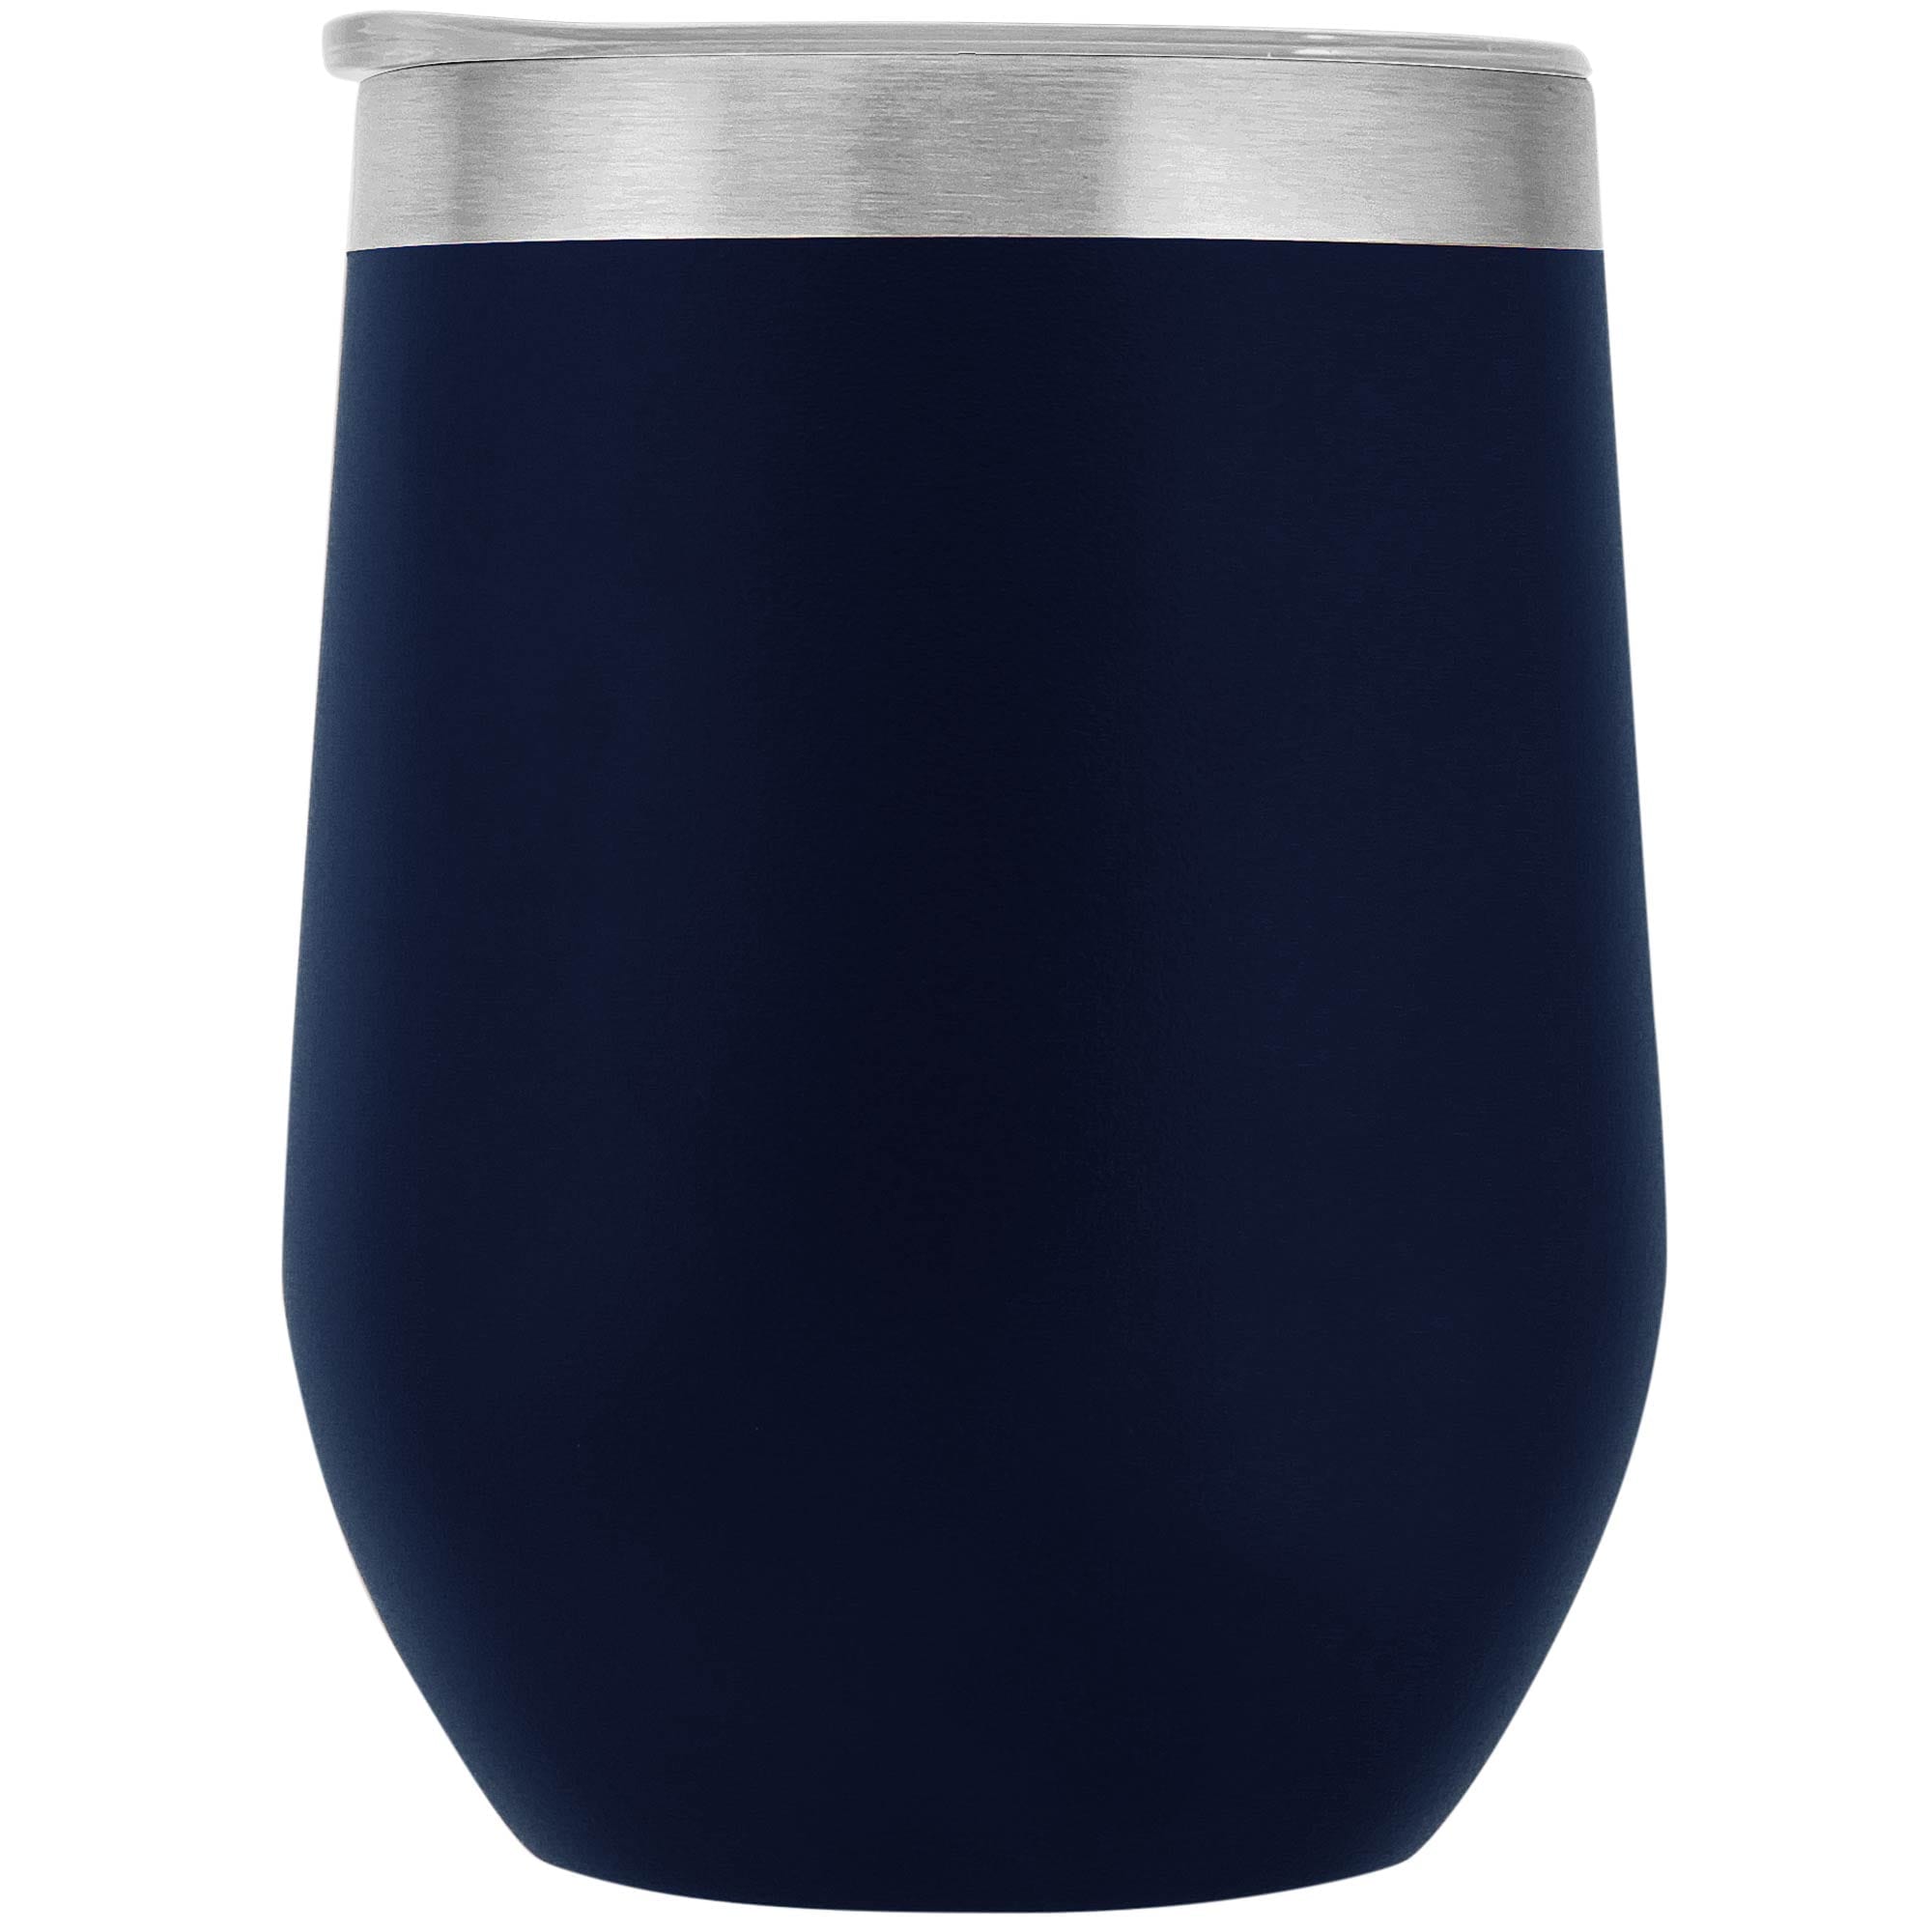 Standard Golf - 4-1/4 Powder-Coated Cup Cover